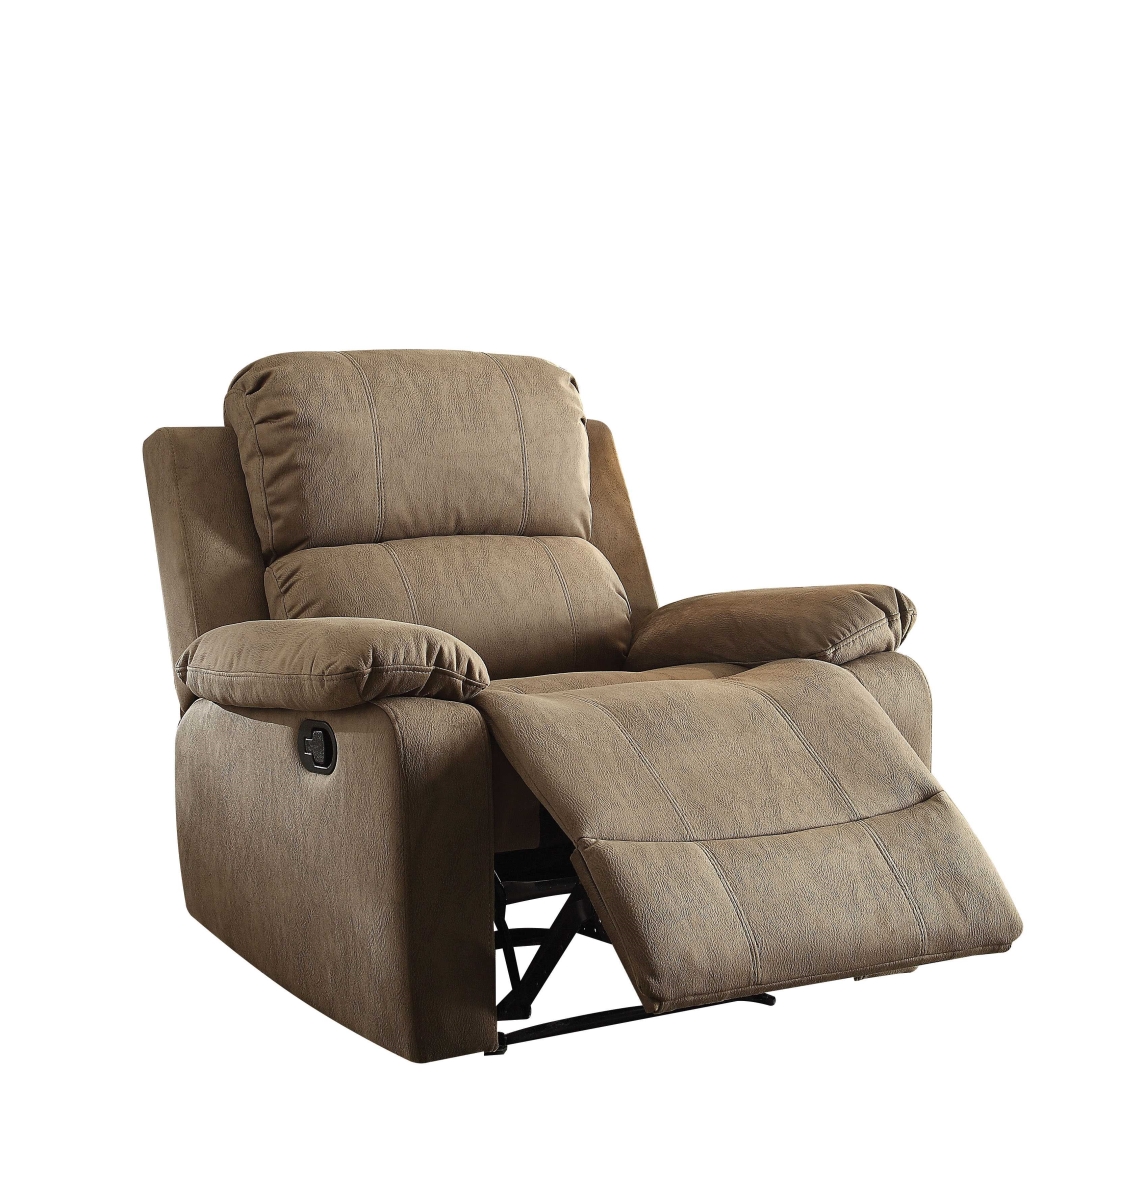 Home Roots Furniture 286179 39 X 38 X 38 In. Polished Microfiber Fabric Recliner - Taupe